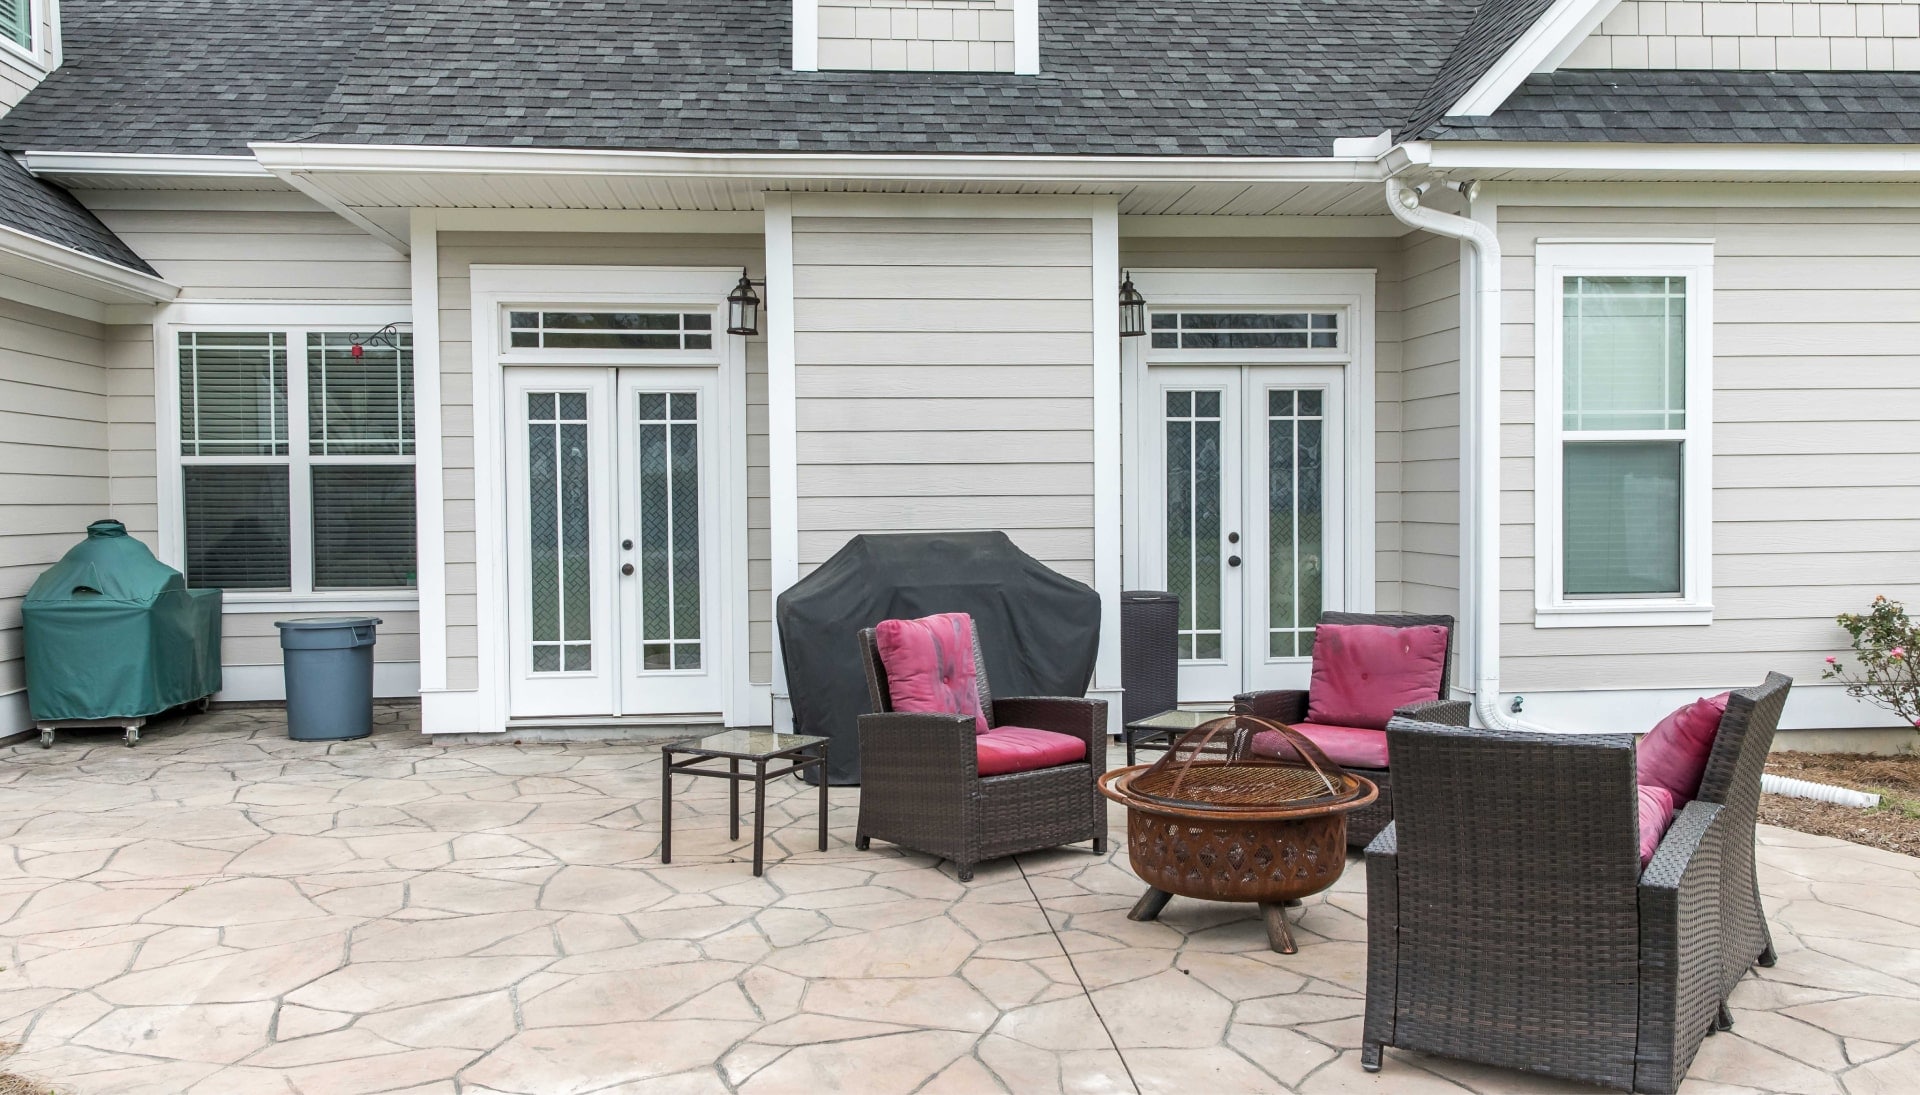 Elevate Your Outdoor Living Space with Stunning Stamped Concrete Patio in Los Angeles, CA - Choose from a Variety of Creative Patterns and Colors to Achieve a Unique and Eye-Catching Look for Your Patio with Long-Lasting Durability and Low-Maintenance.